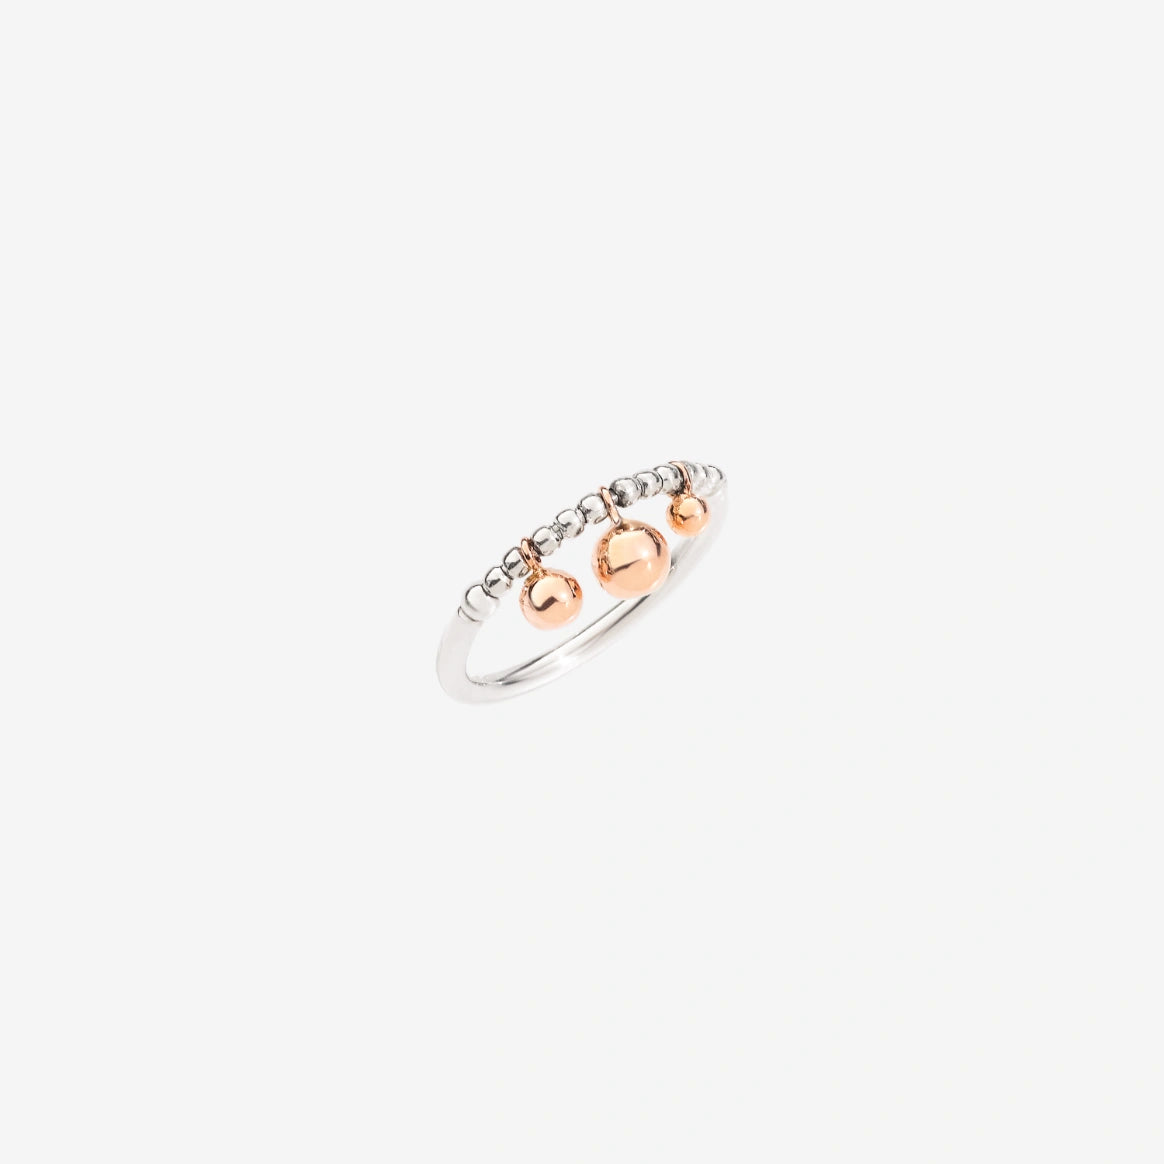 Dodo Bollicine Ring in Sterling Silver with Rose Gold and Silver Spheres - Orsini Jewellers